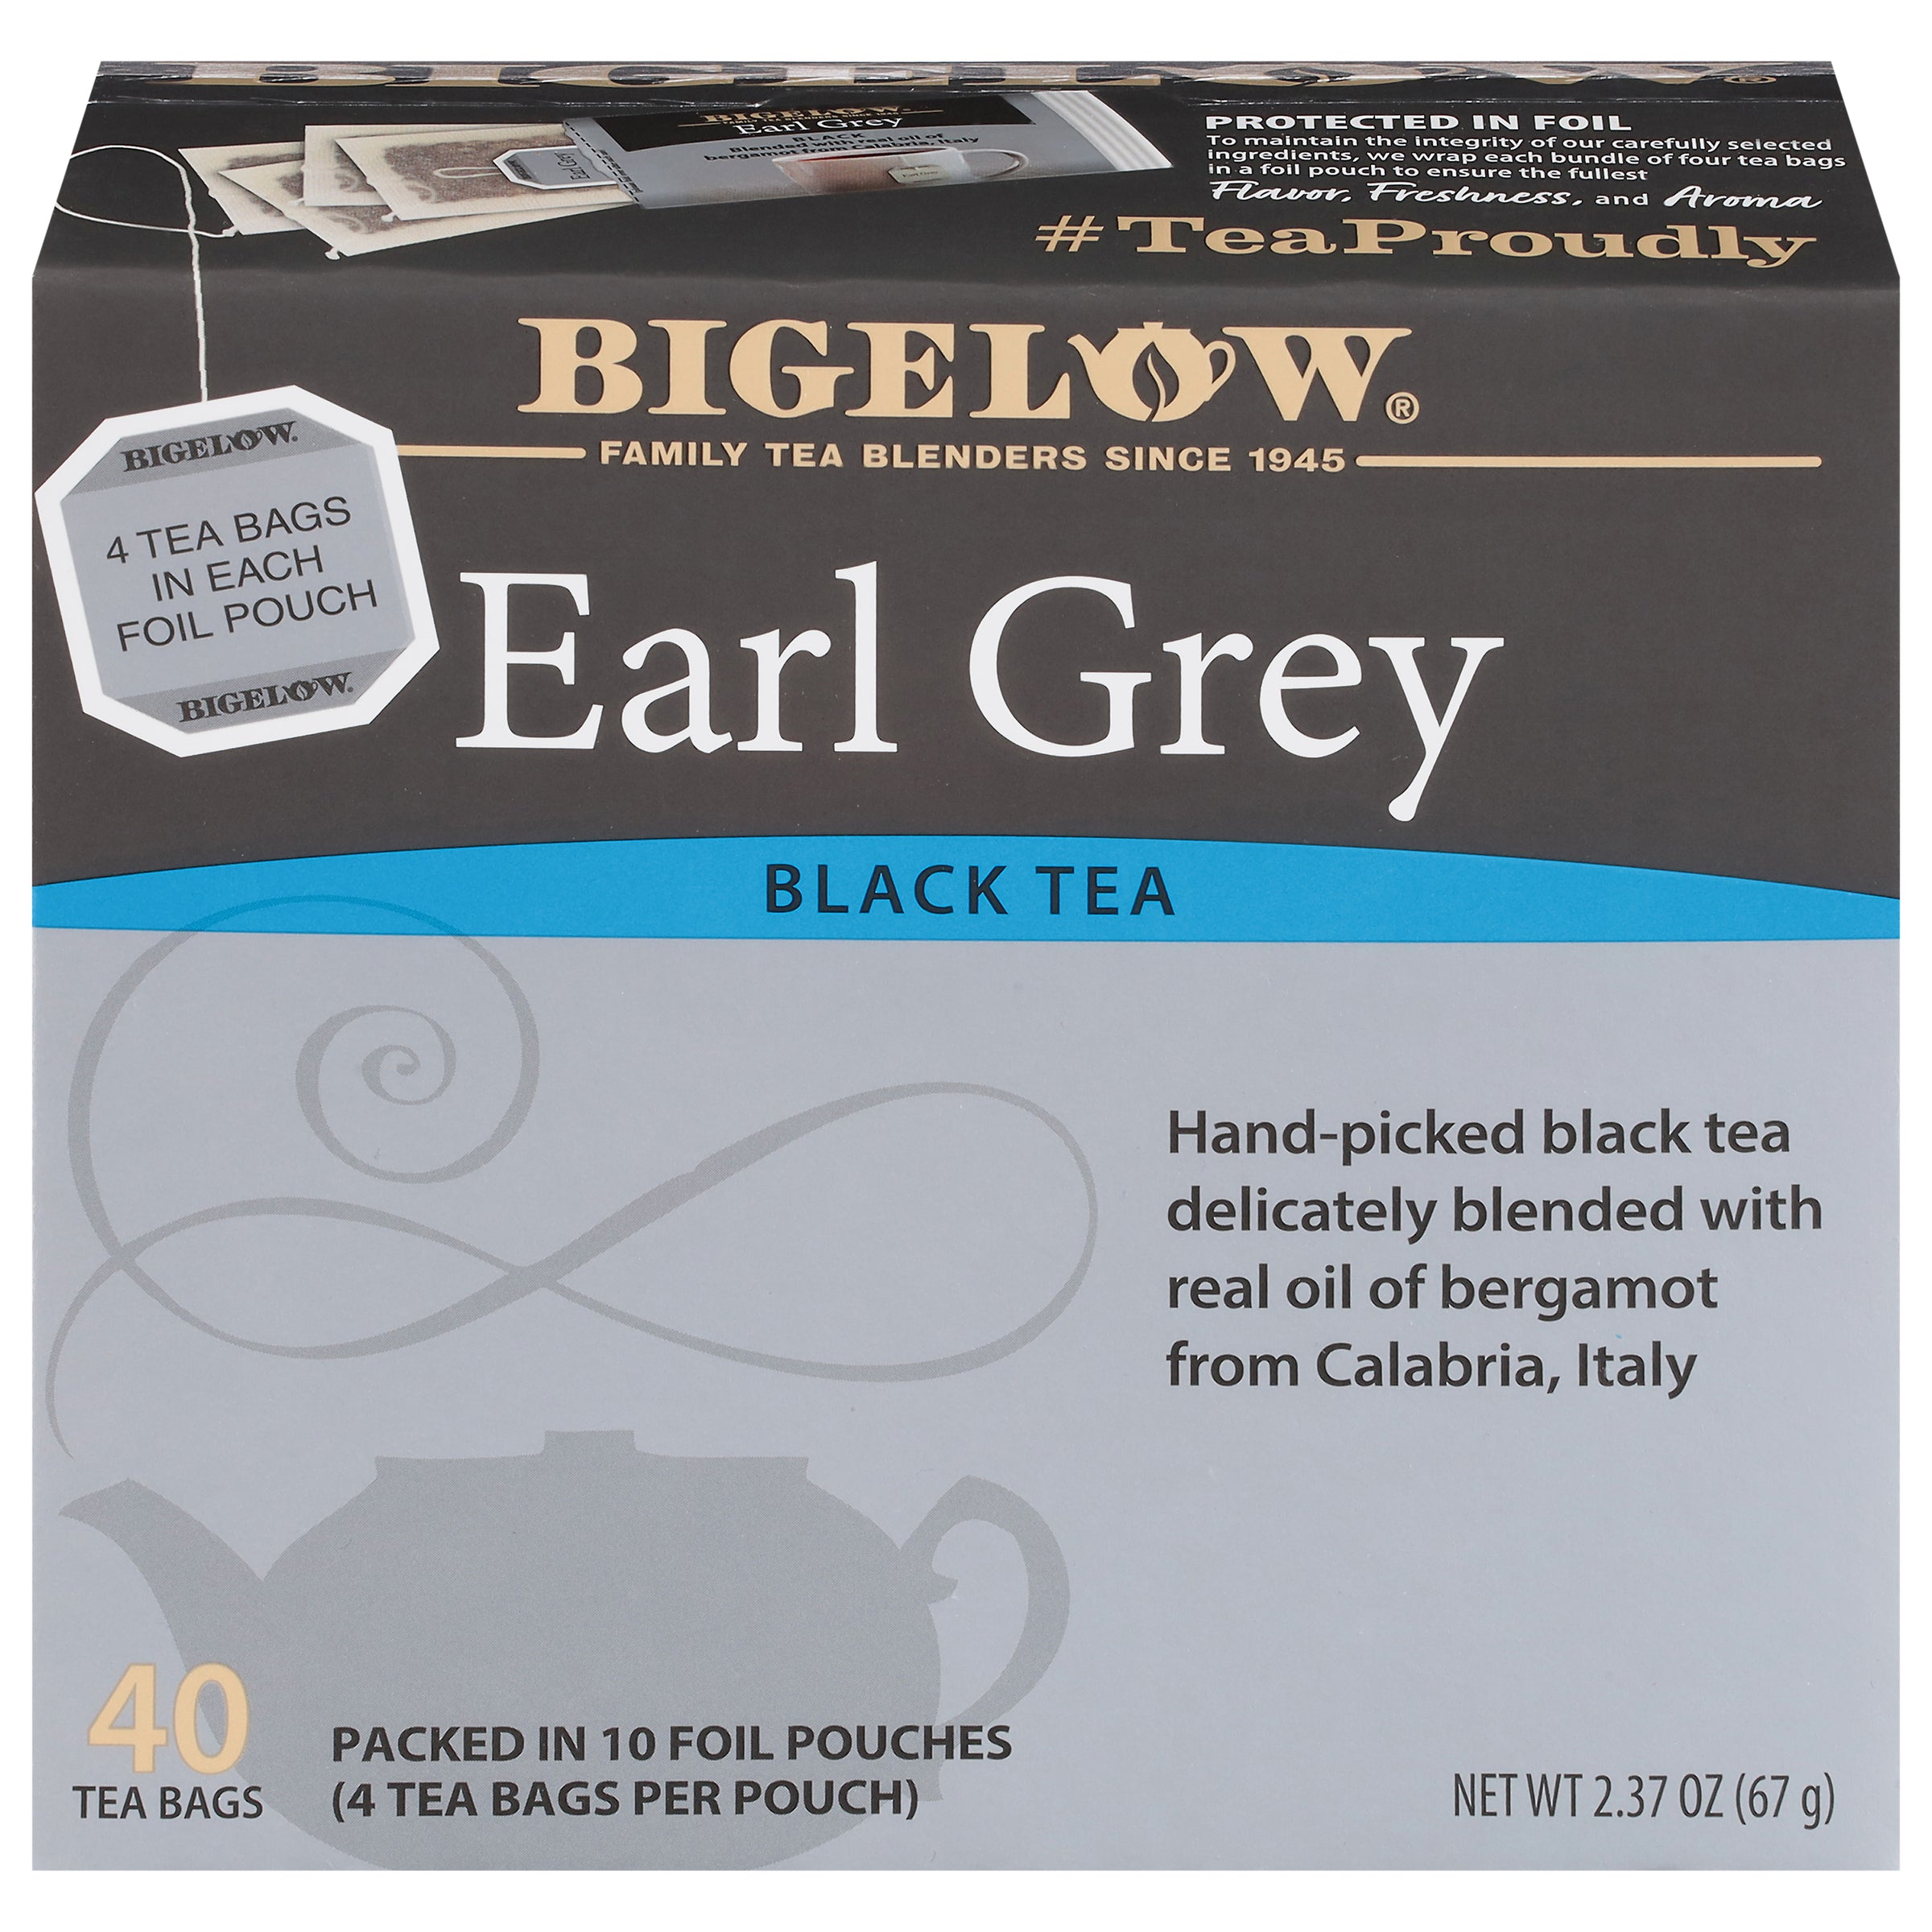 Green Tea Organic 40 Count - Case of 6 boxes- total of 240 teabags –  Bigelow Tea